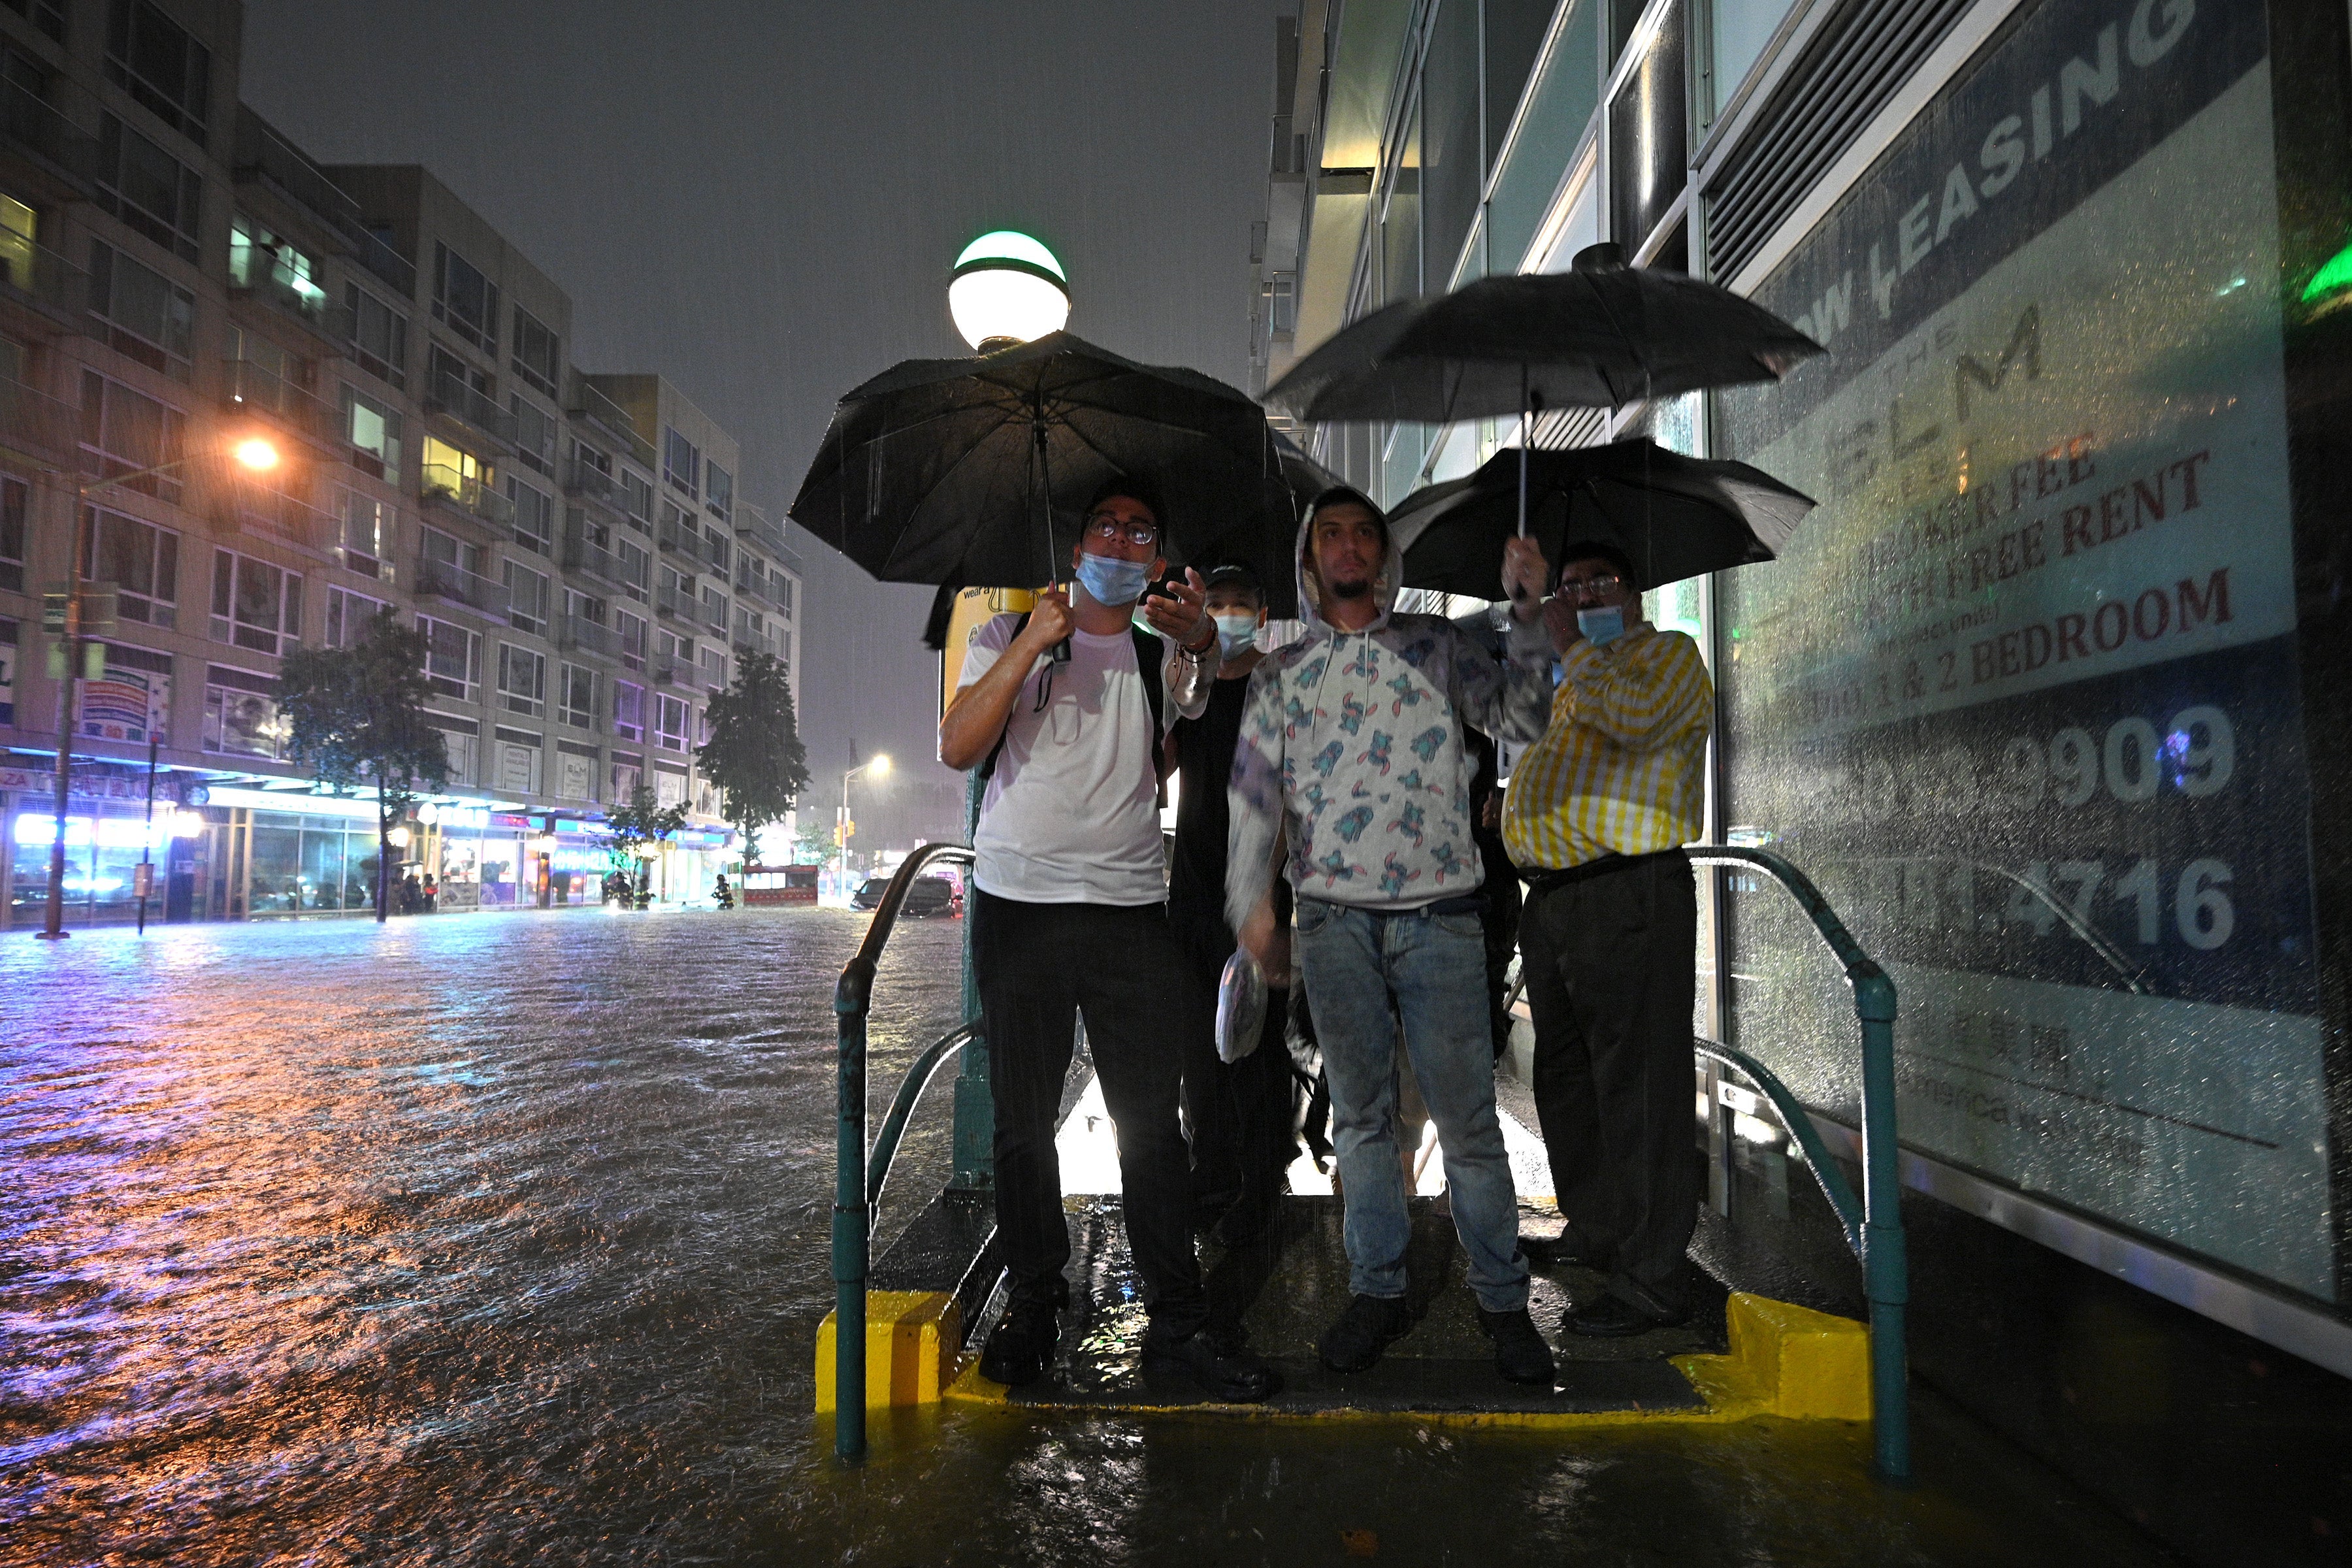 People holding umbrellas stand huddled at a subway entrance as water fills the street and sidewalk.